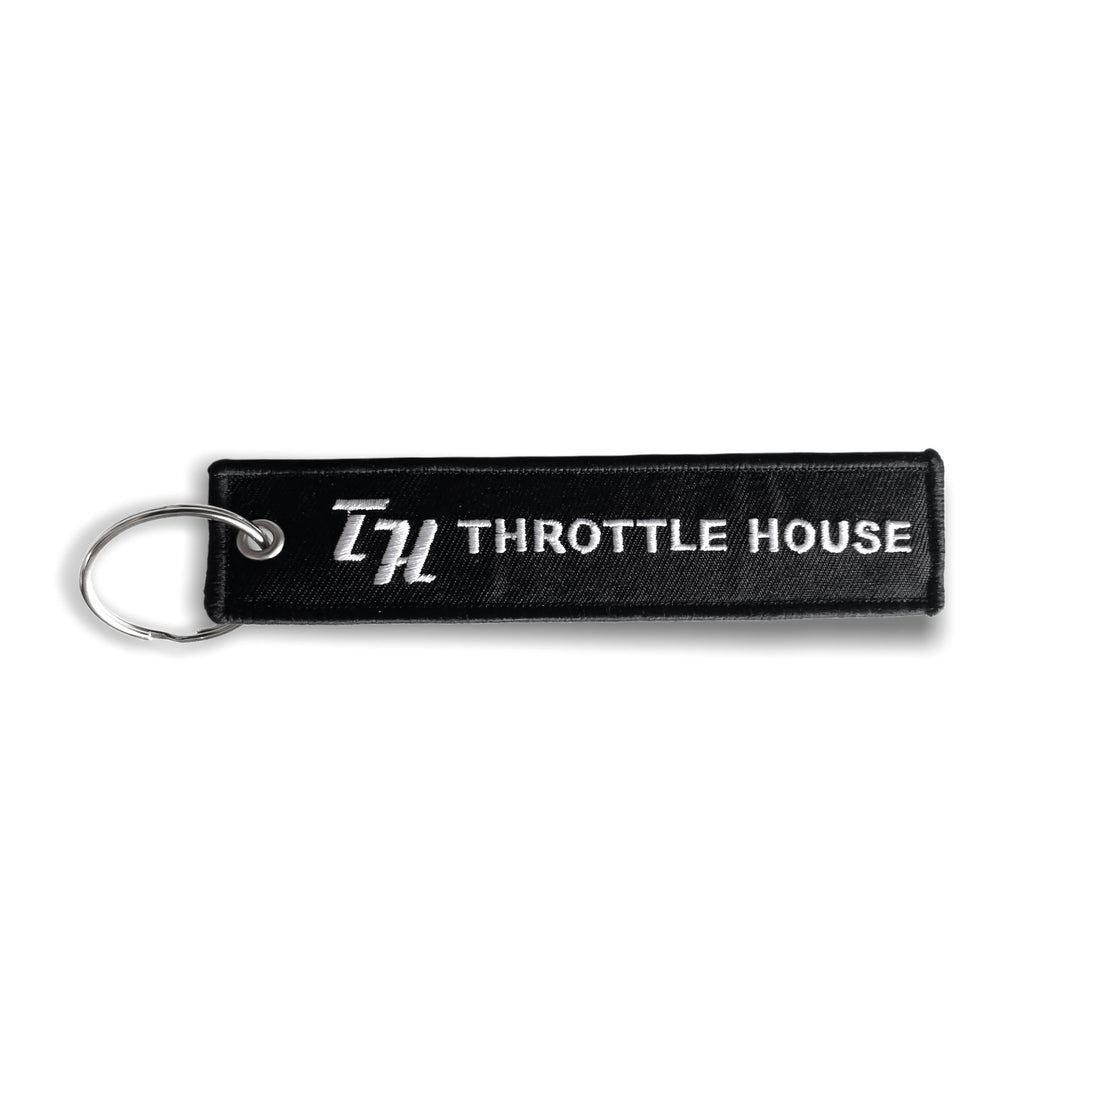 Throttle House - Embroidered Key Tag